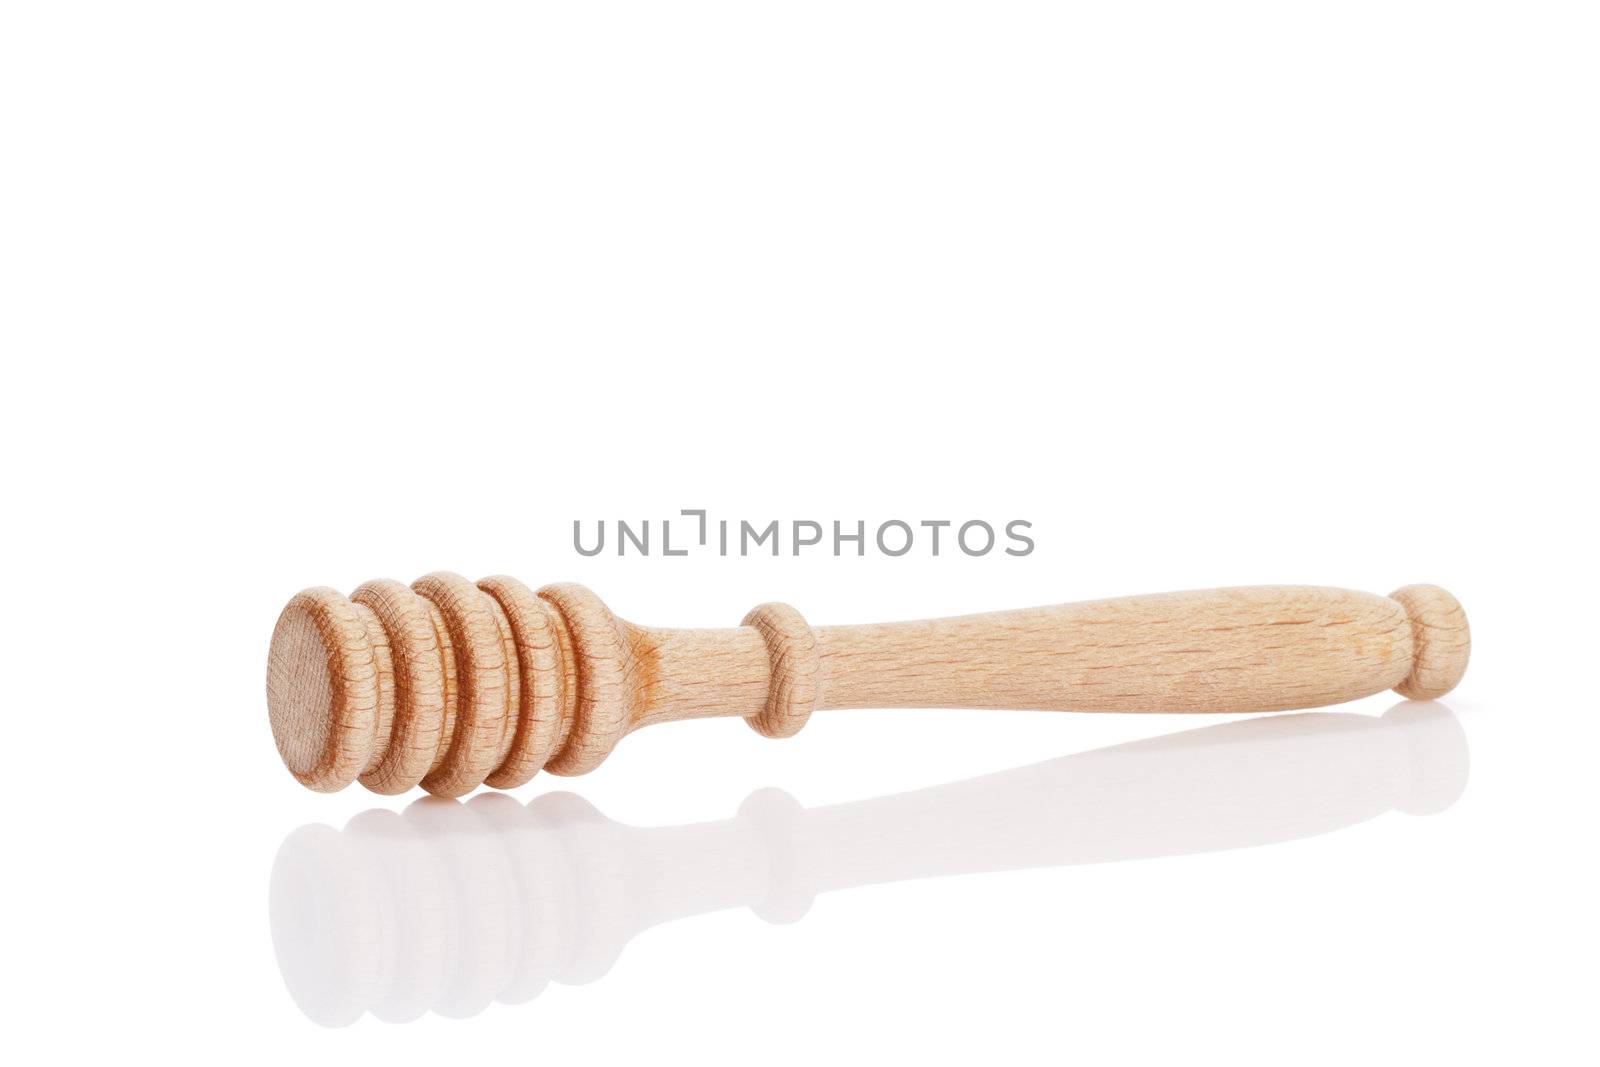 honey dipper with reflection on white background